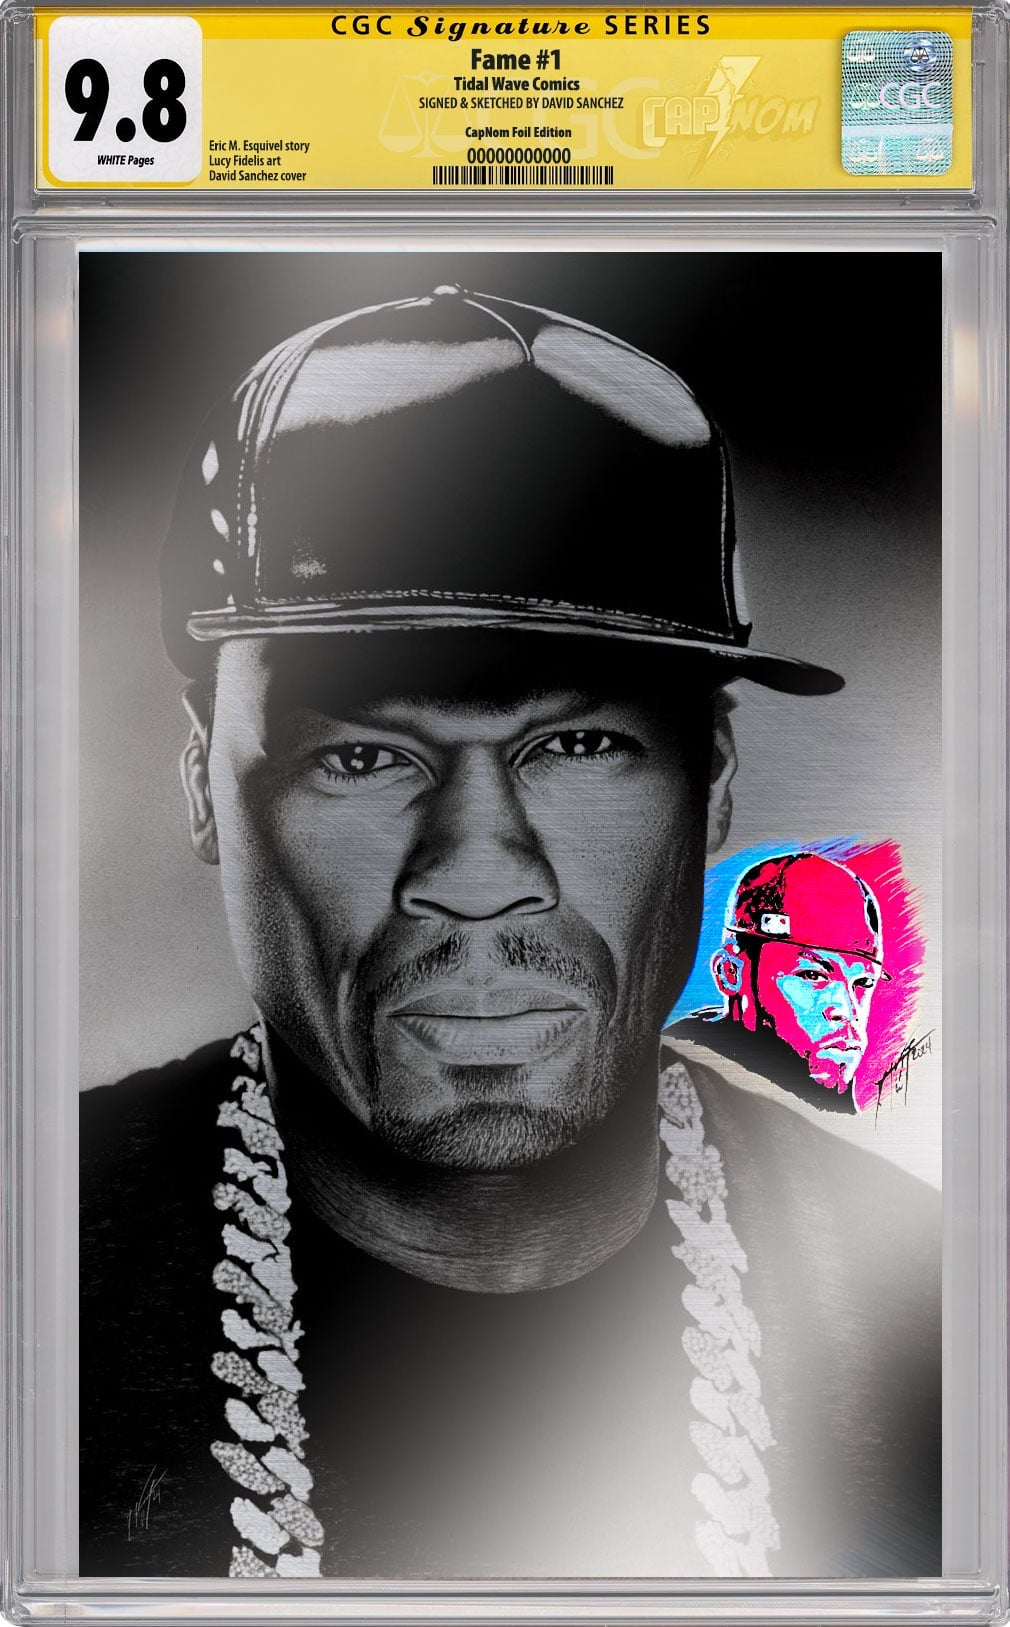 50 CENT FAME C2E2 Exclusive CGC SS 9.8 Virgin Foil Cover Signed and Color Remark by David Sanchez